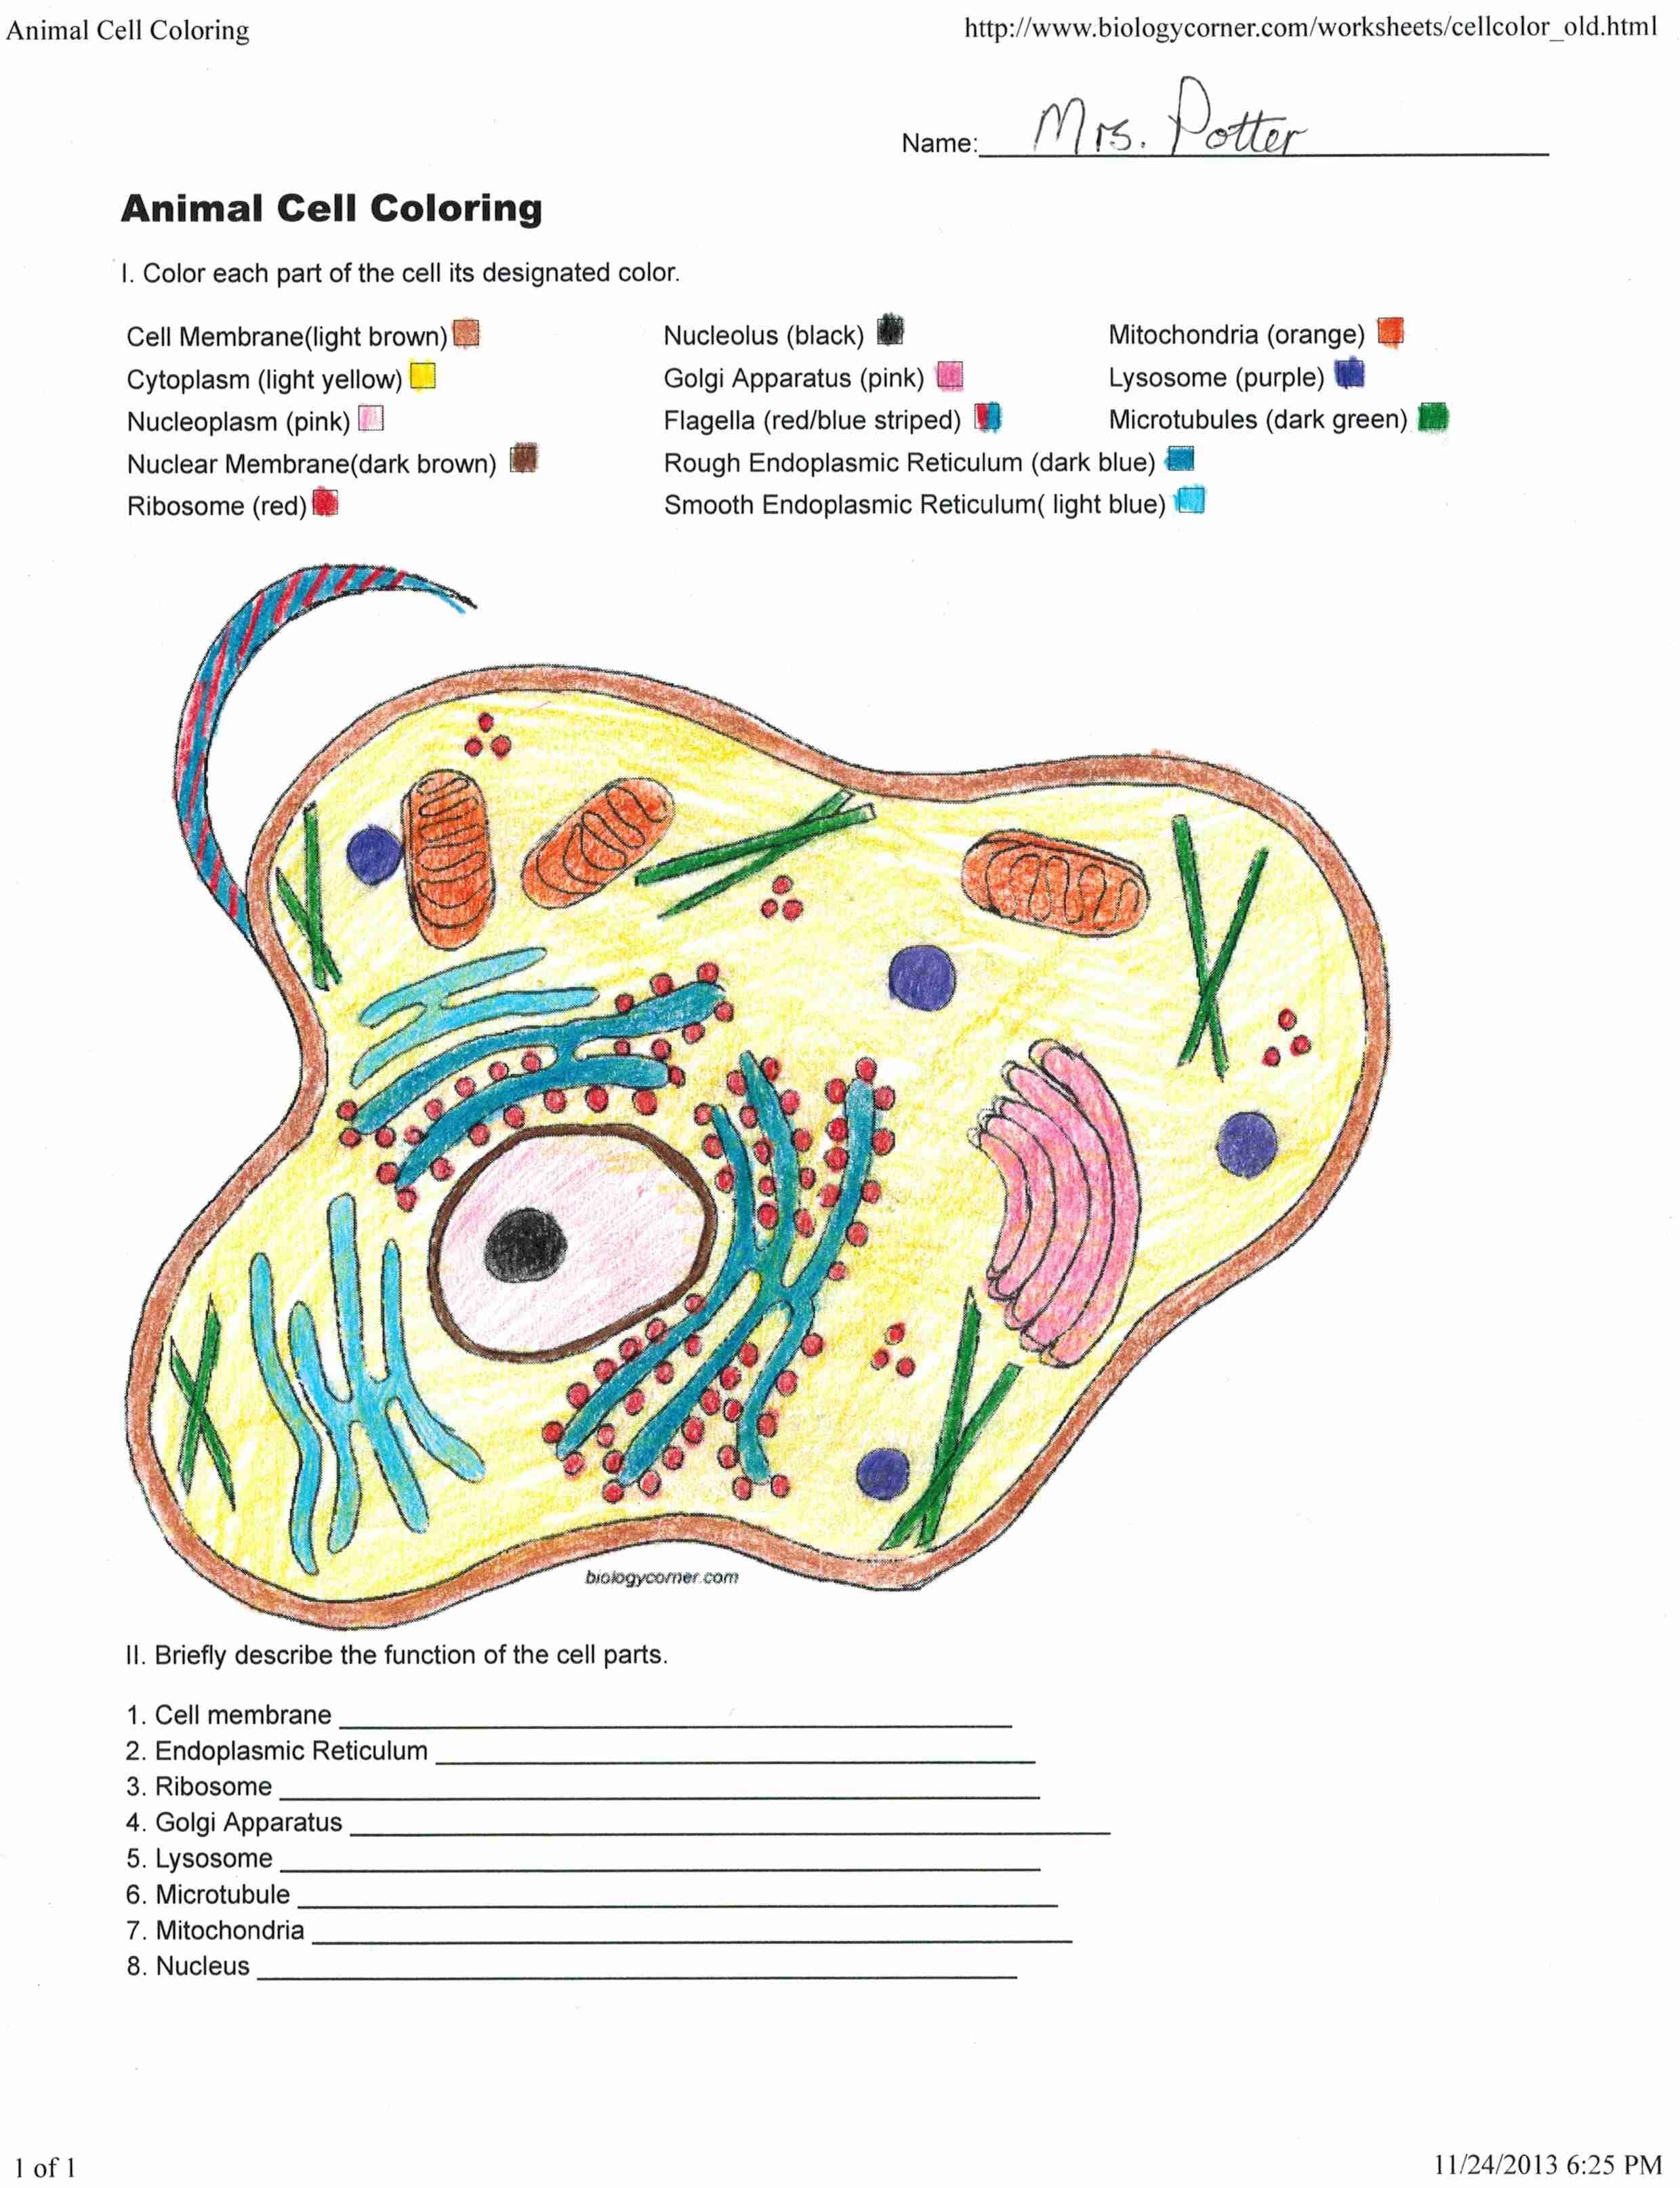 Animal Cell Coloring Answers